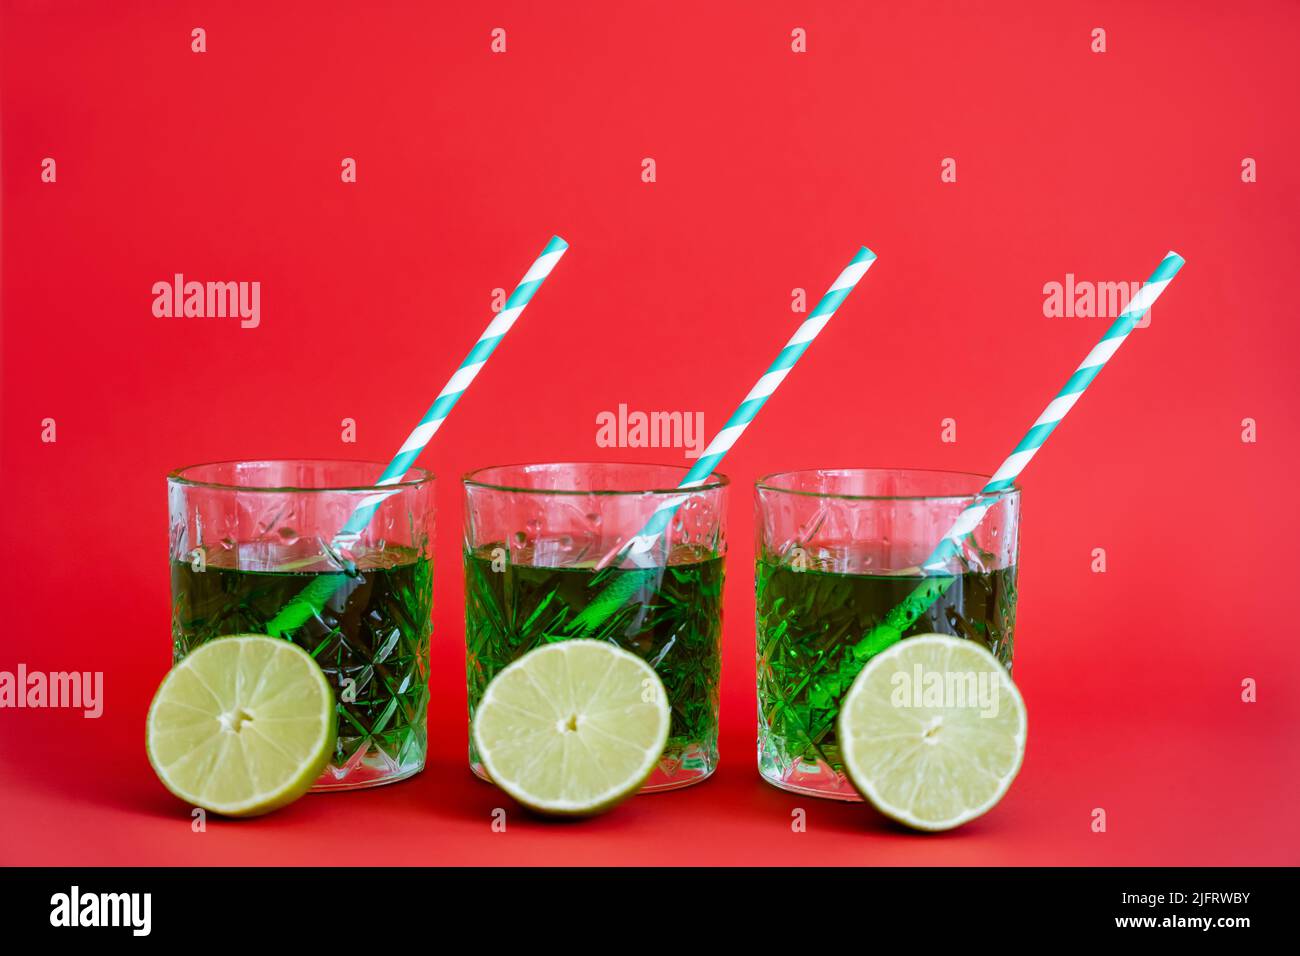 green alcohol drink in faceted glasses with straws and halves of limes on red Stock Photo